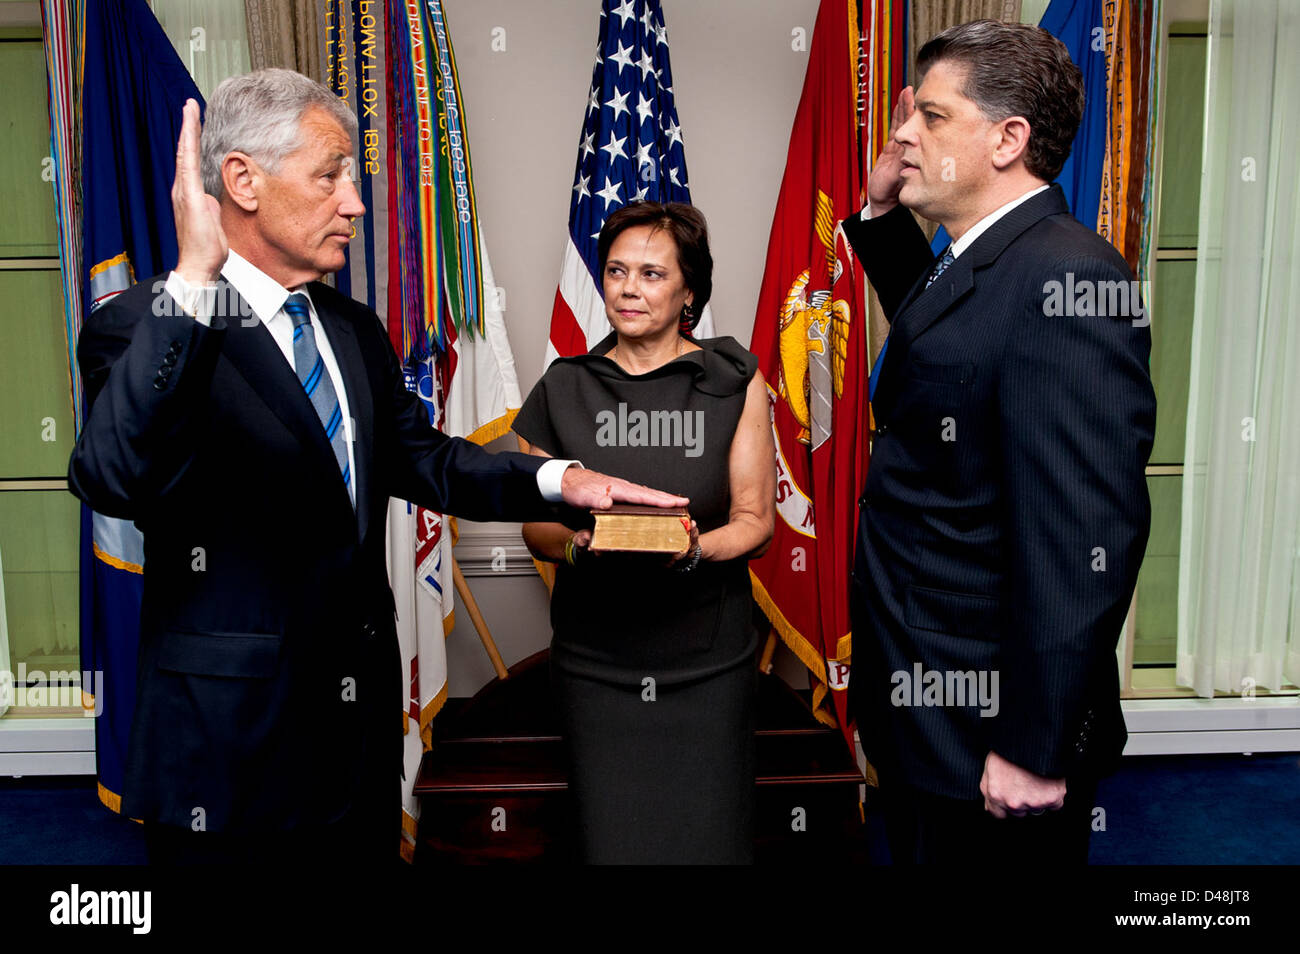 The new SECDEF is sworn in to office. Stock Photo